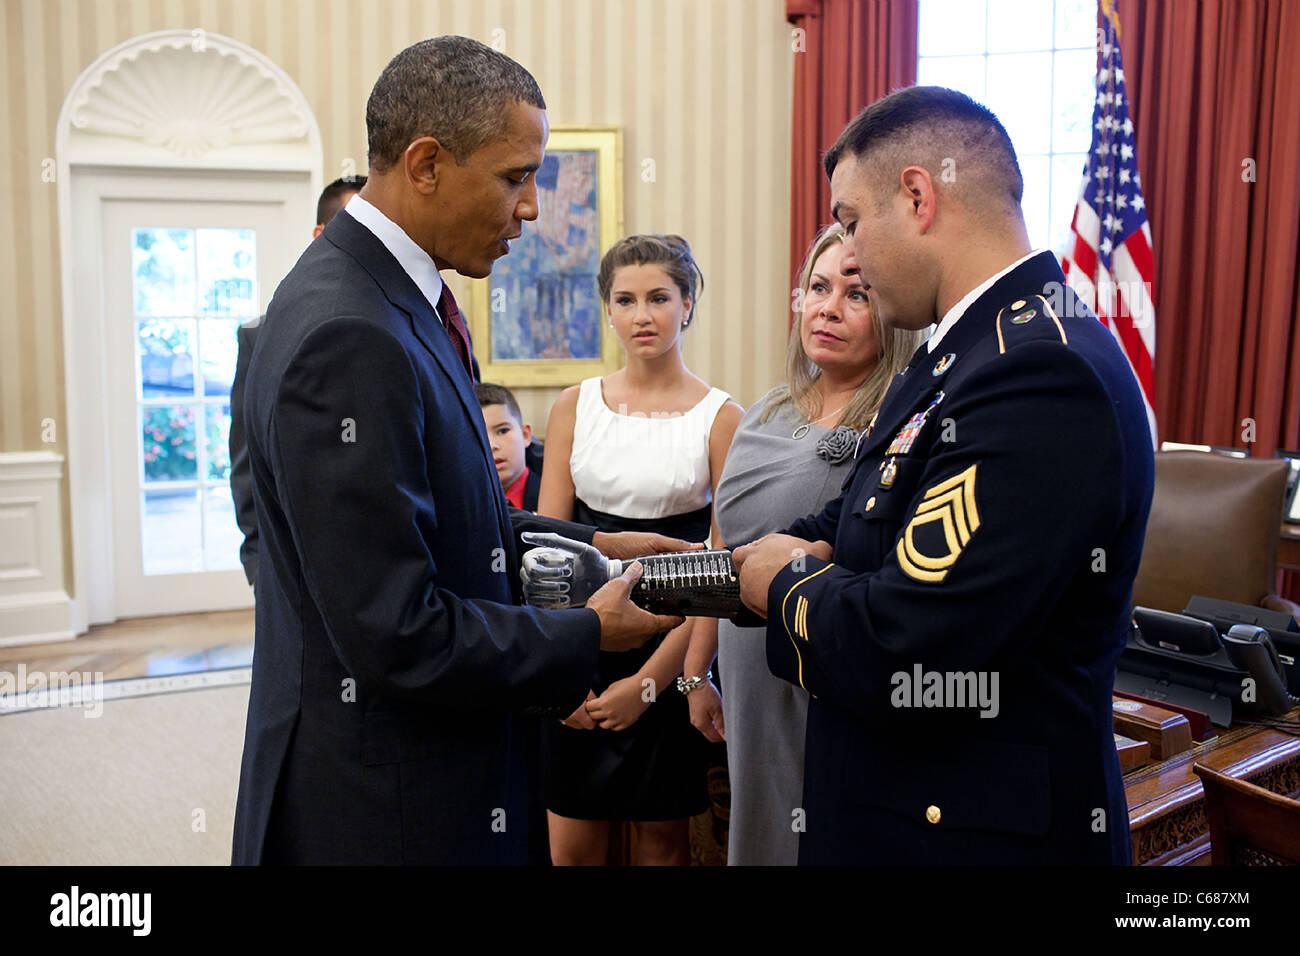 Sergeant First Class Leroy Arthur Petry, U.S. Army, shows President Barack  Obama a plaque with the names of the fallen Rangers from the 75th Regiment  on his prosthetic arm, during a meeting